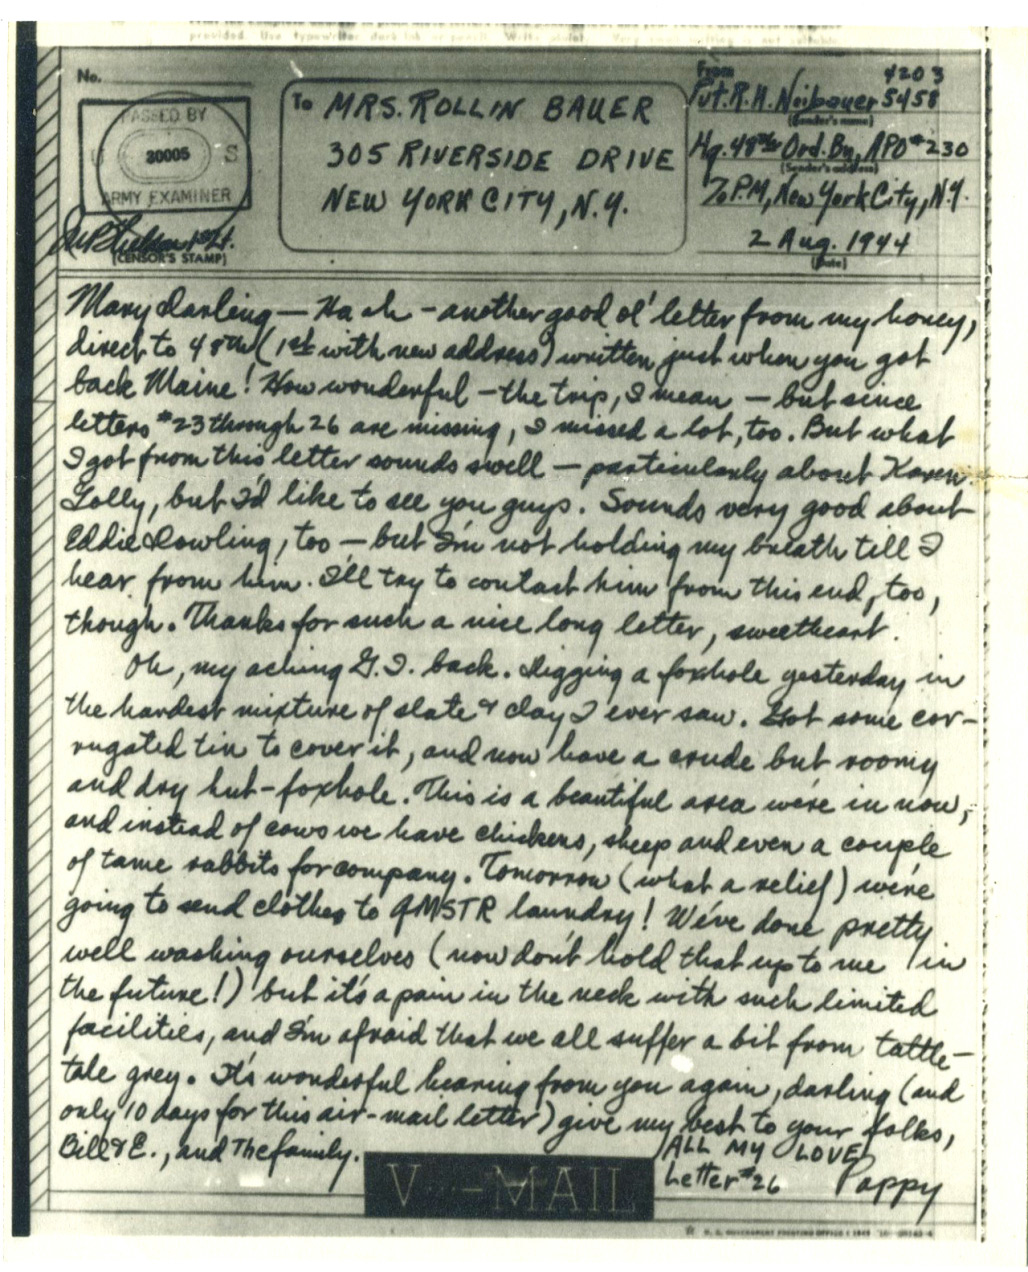 8-2-44-new-foxhole-ww2-letter-mary-anne-erickson